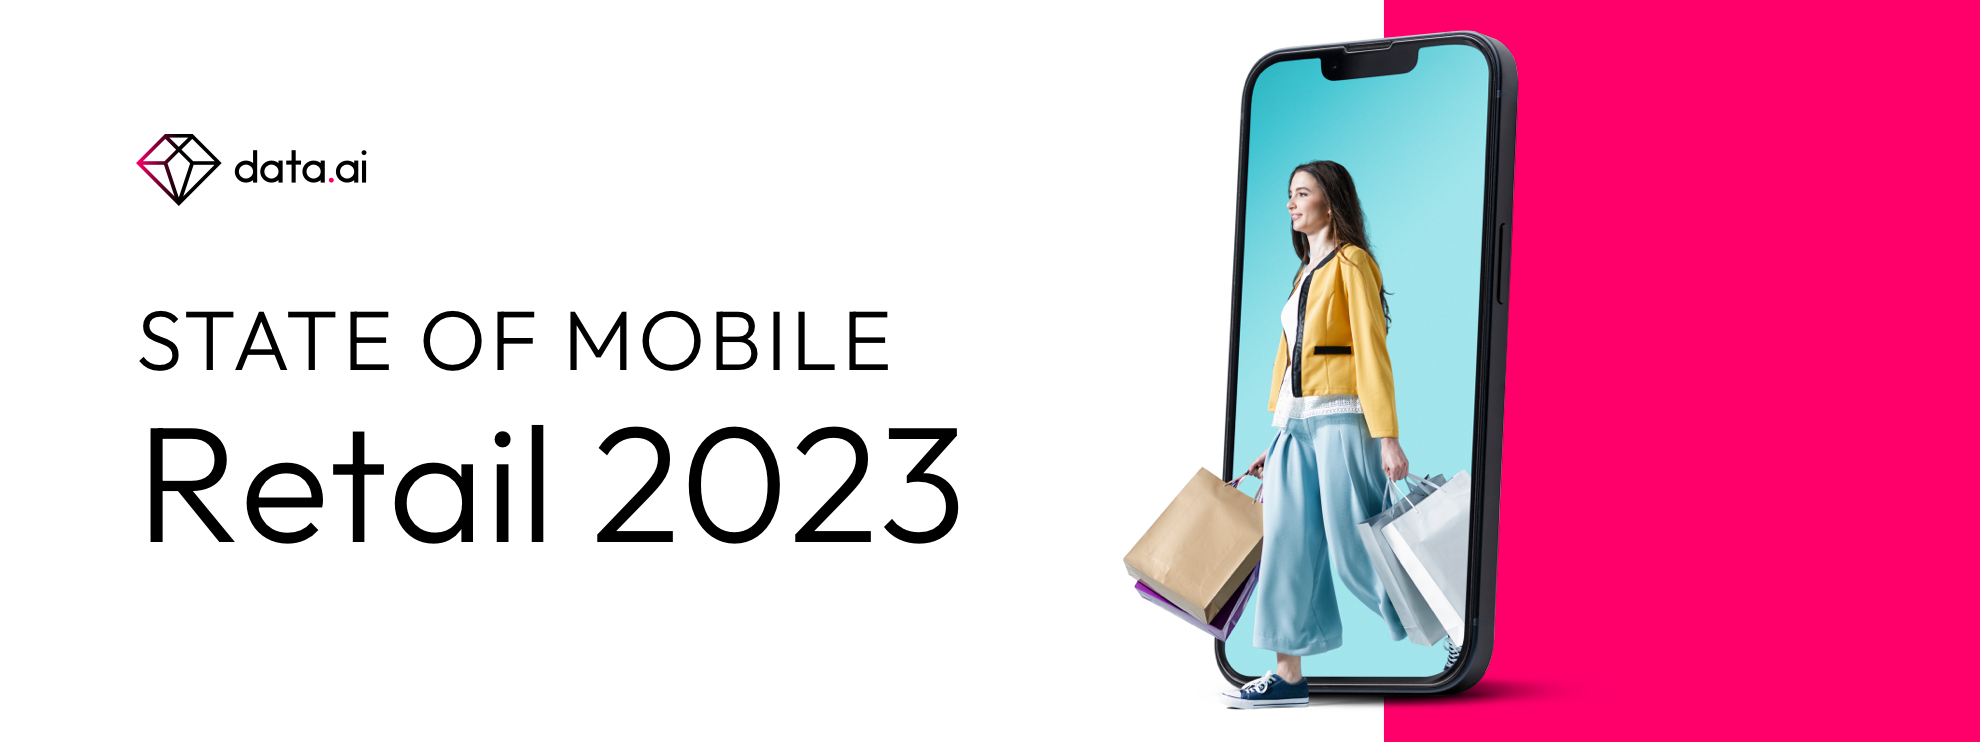 State of Mobile Retail 2023